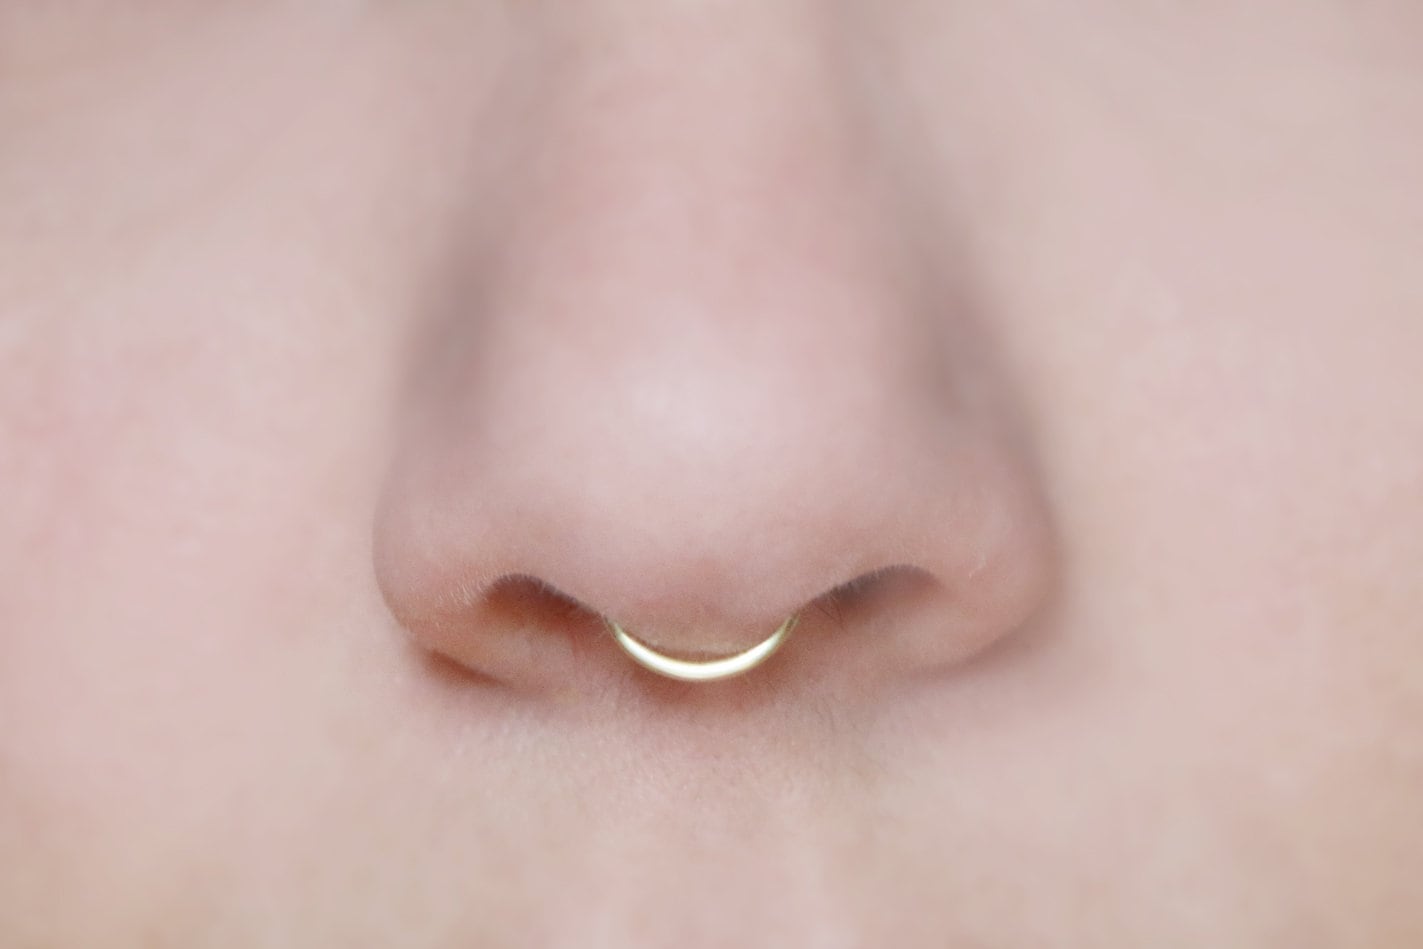 Amazon.com: Gold Septum Ring, Gold Plated Silver Tribal Indian Unique Nose  Hoop Piercing Earring, Also Fits Tragus, Cartilage, Helix, Nose Ring, 18g,  Handmade Body Jewelry By Umanative Design : Handmade Products